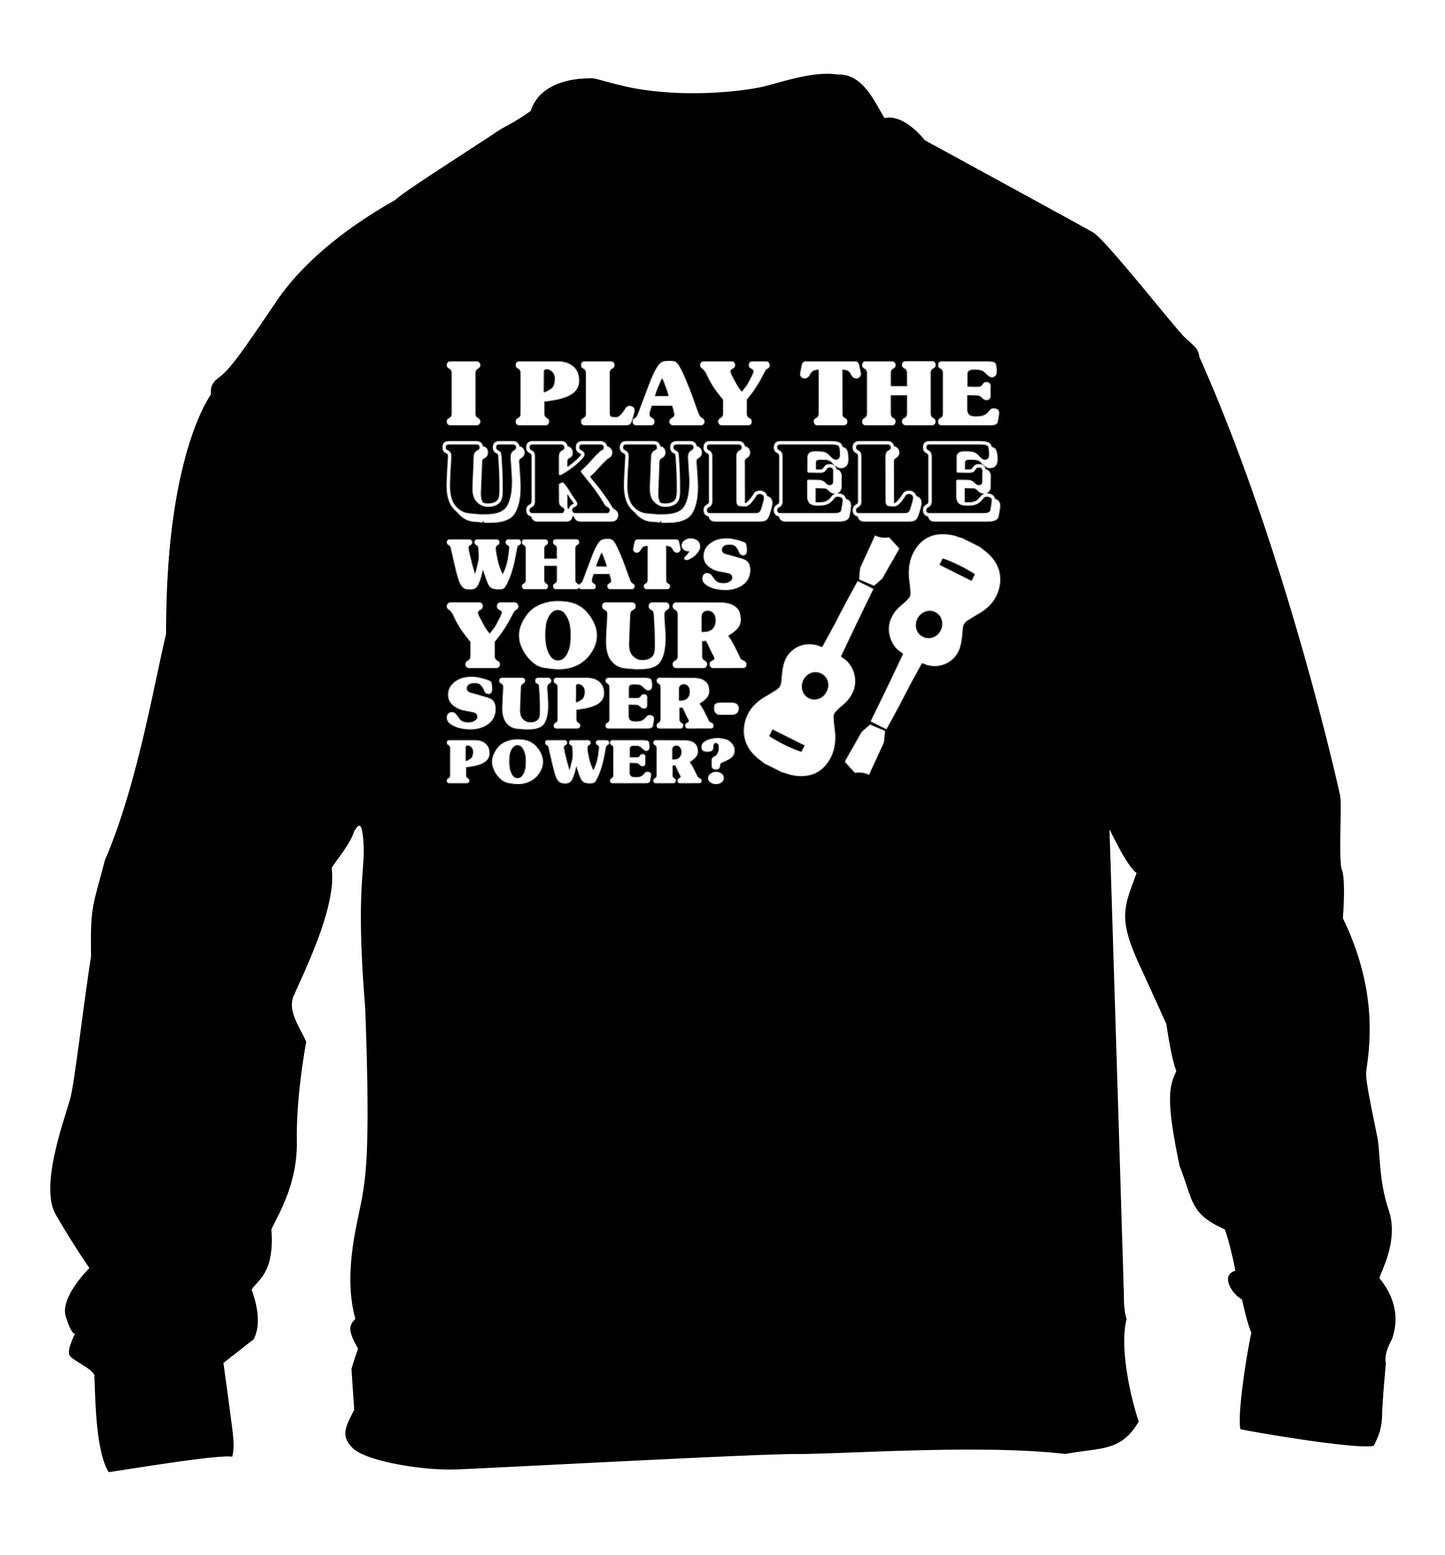 I play the ukulele what's your superpower? children's black sweater 12-14 Years